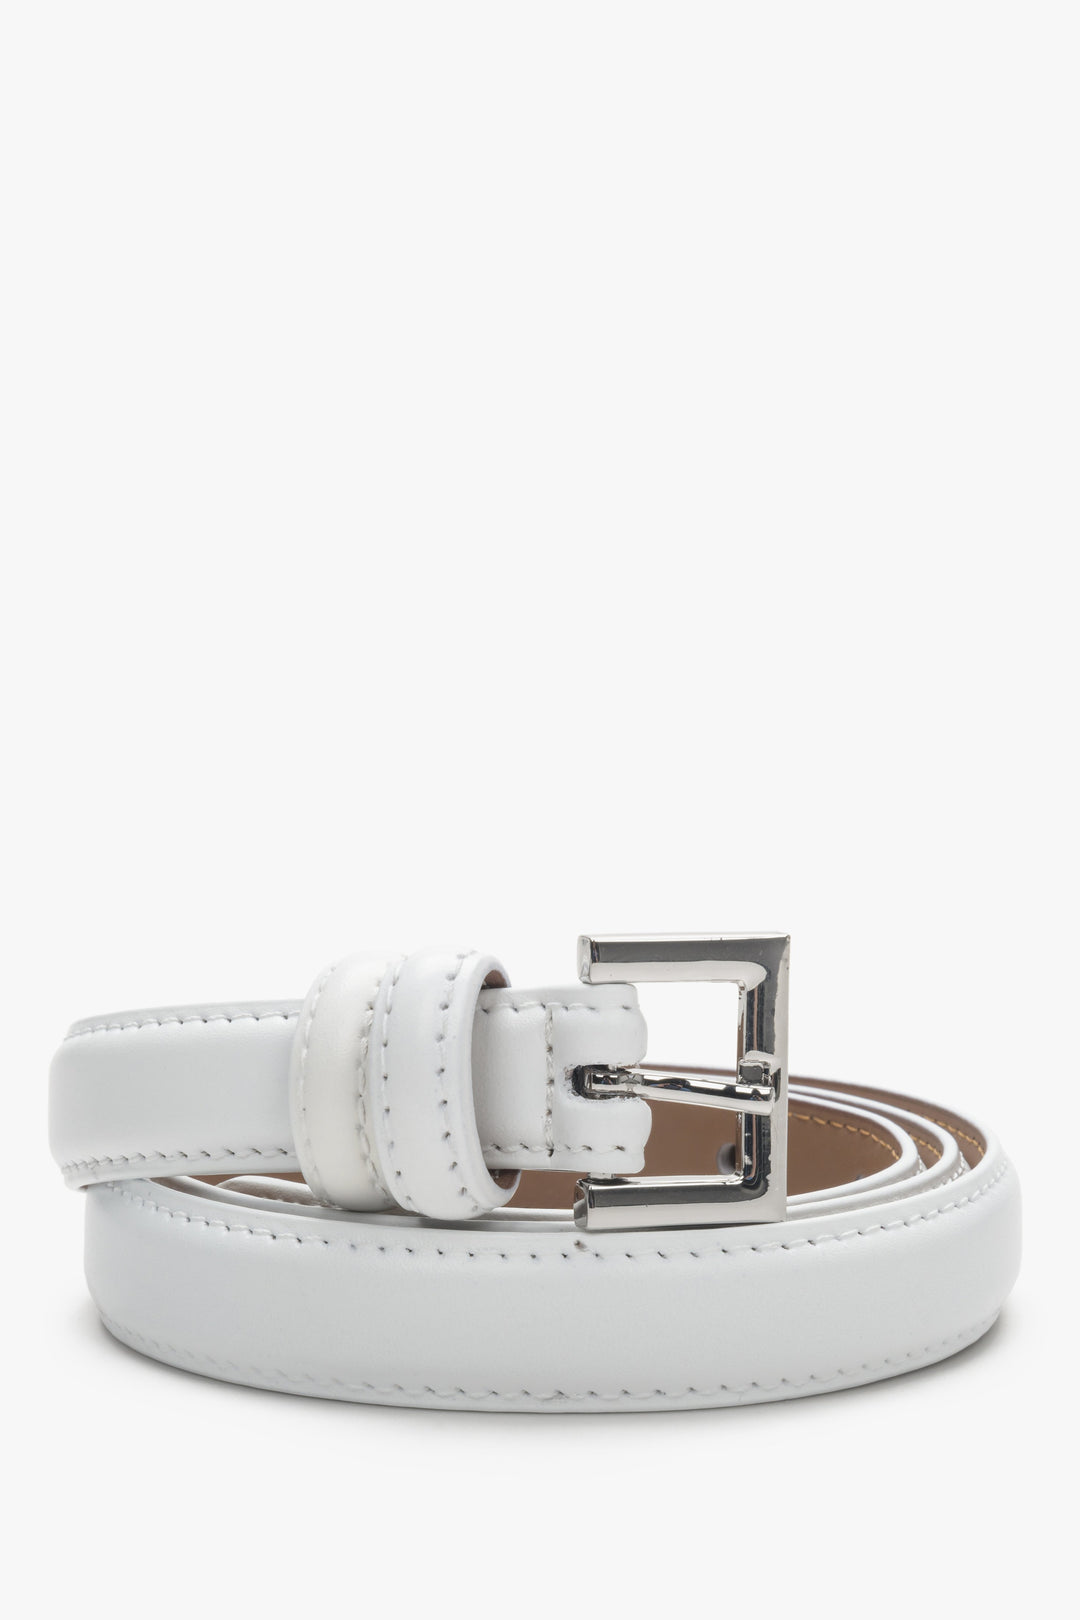 Women's White Leather Belt with Silver Buckle Estro ER00113202.